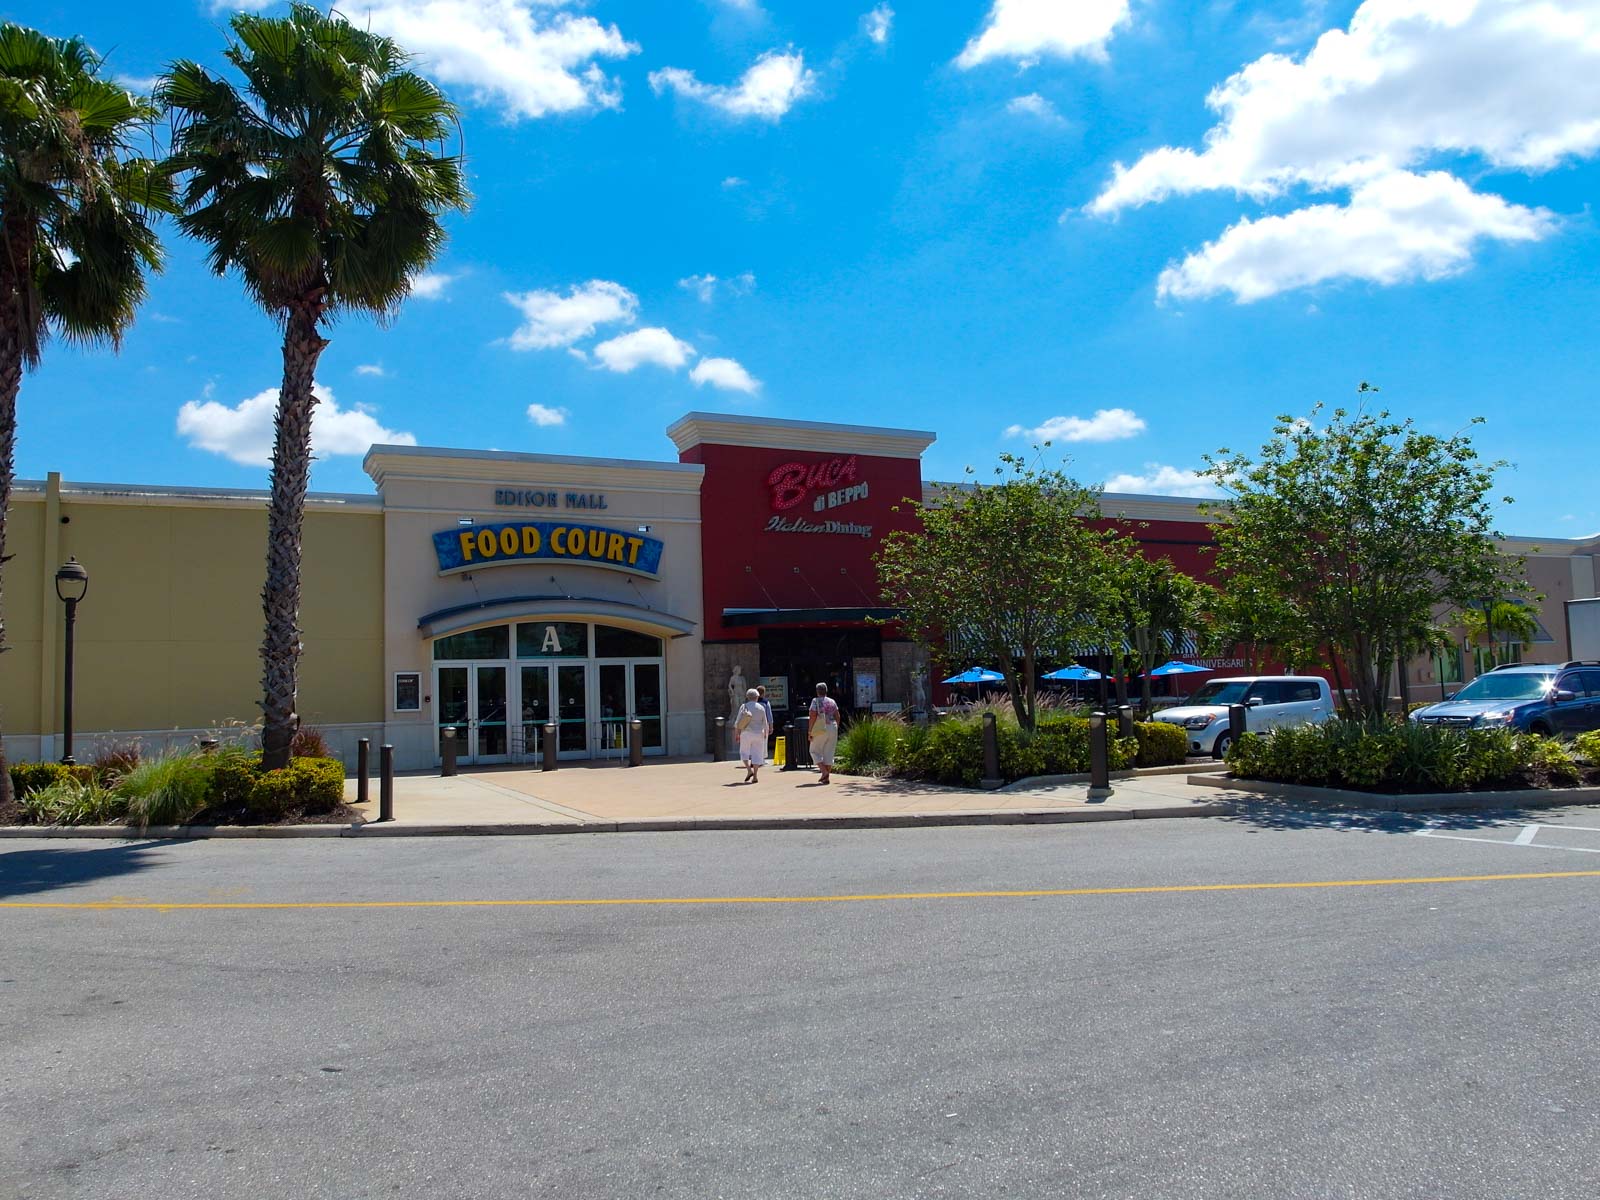 Edison Mall Fort Myers